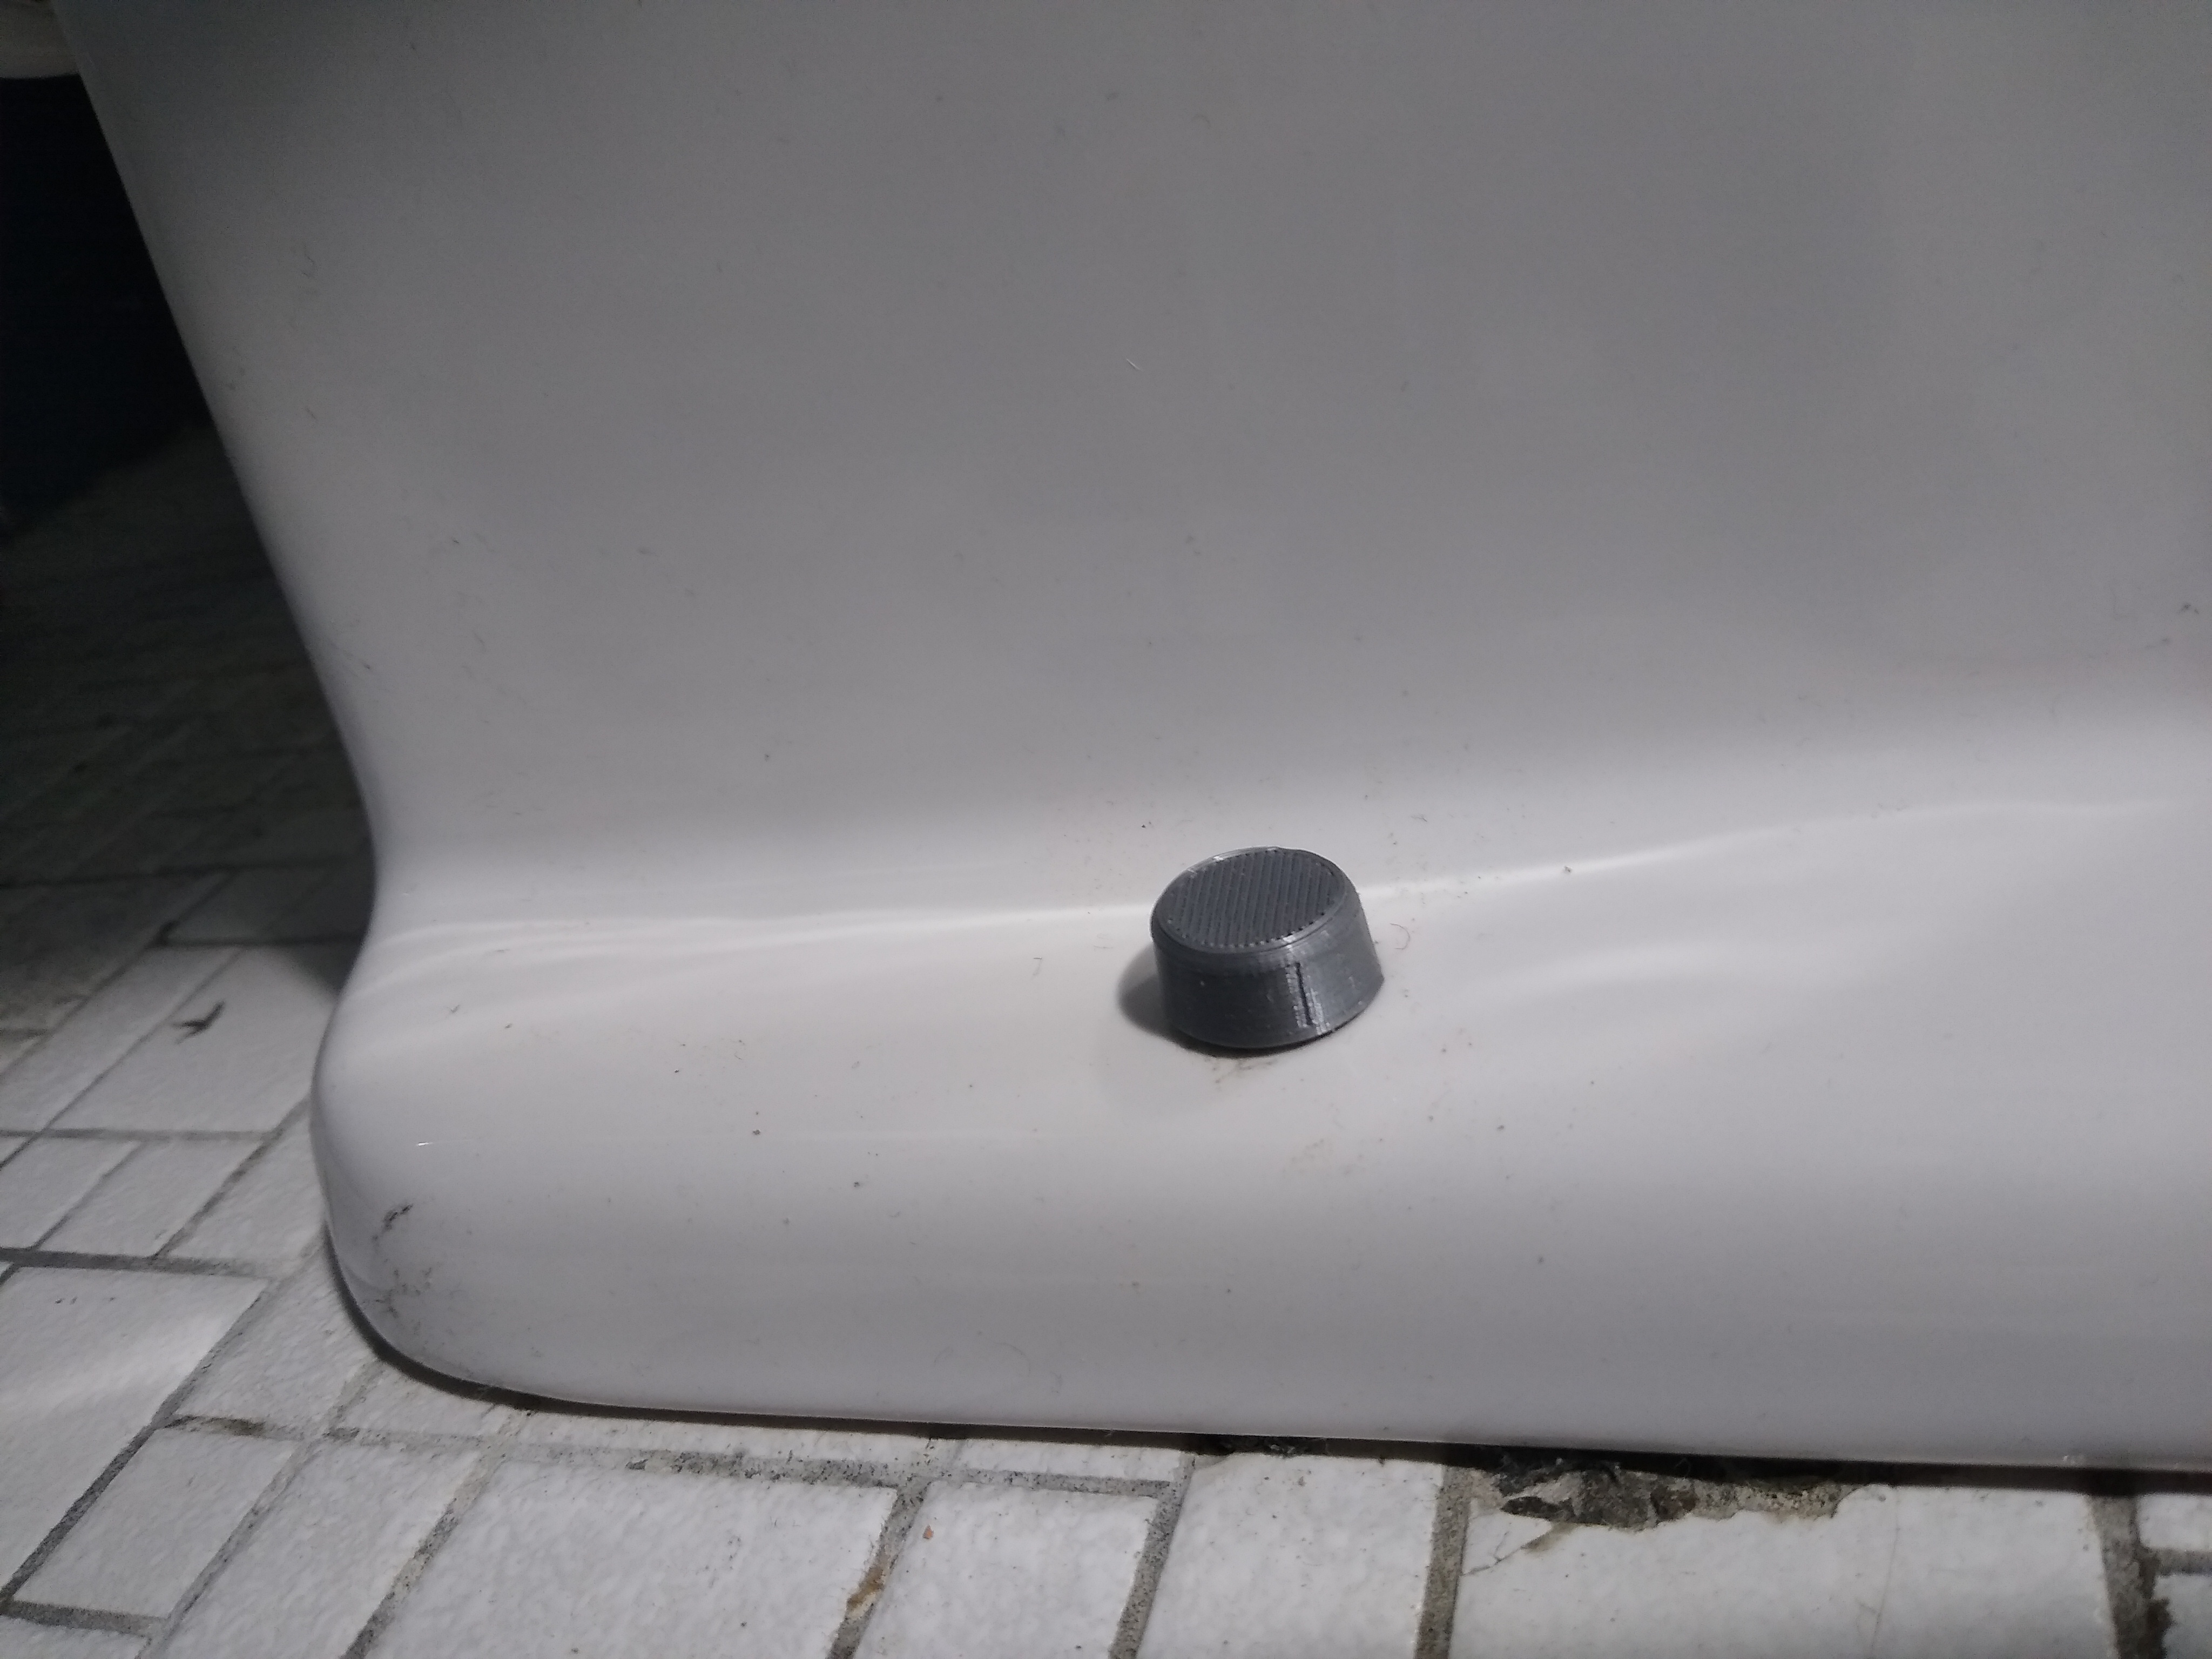 Replacement caps for screws on toilet